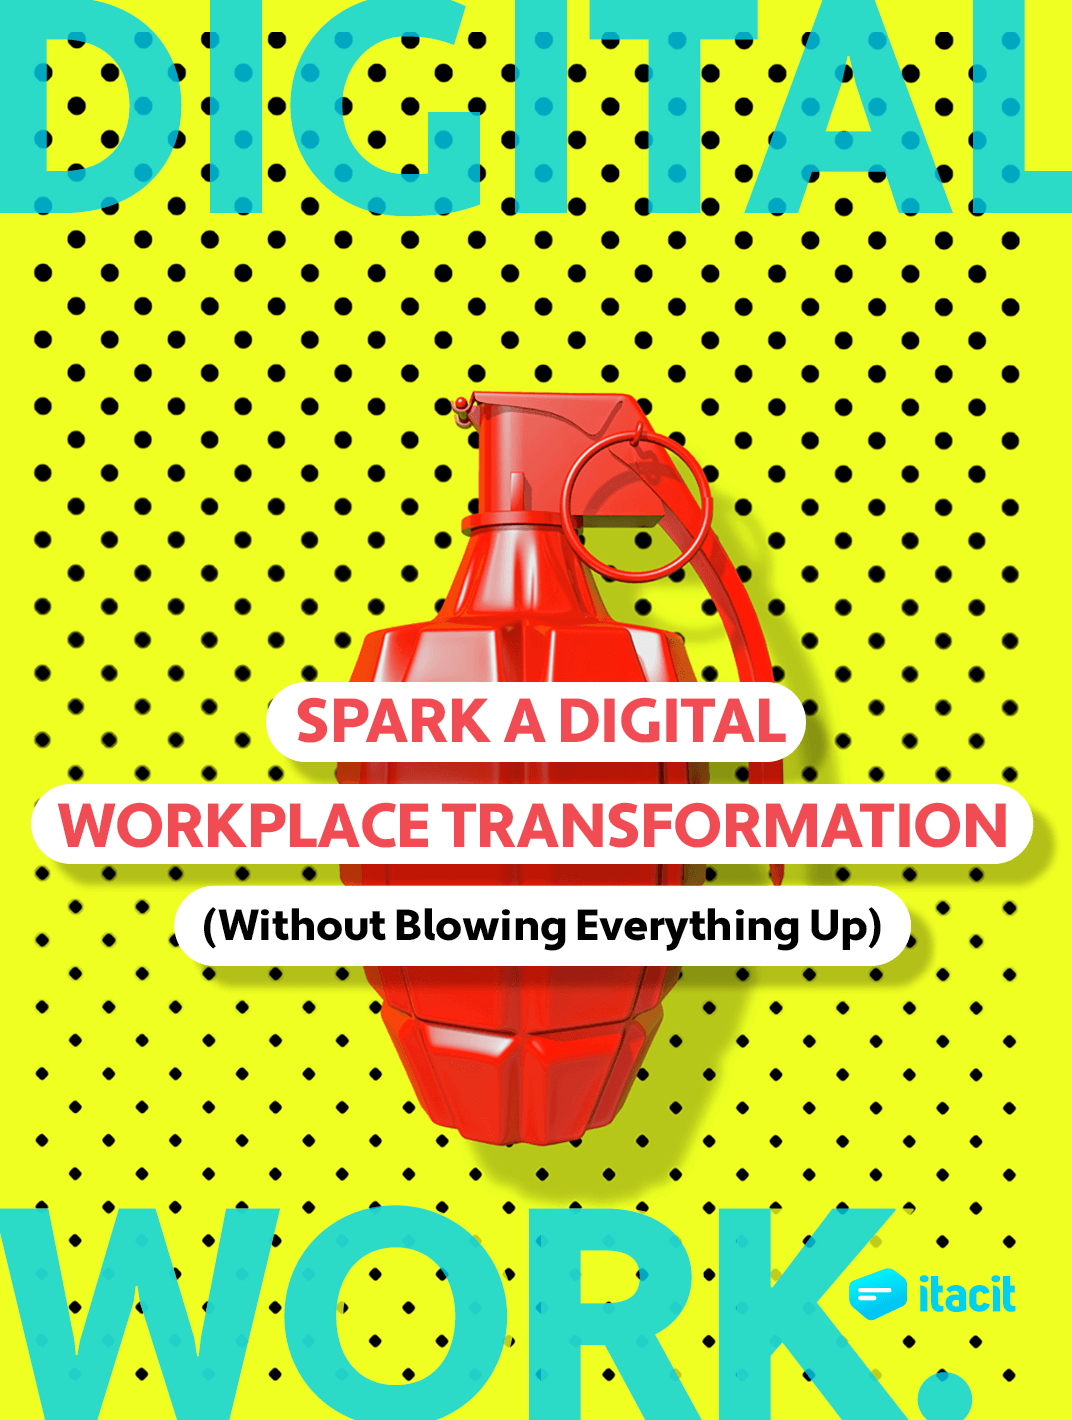 Why There’s No Time Like The Present To Launch A Digital Workplace Transformation